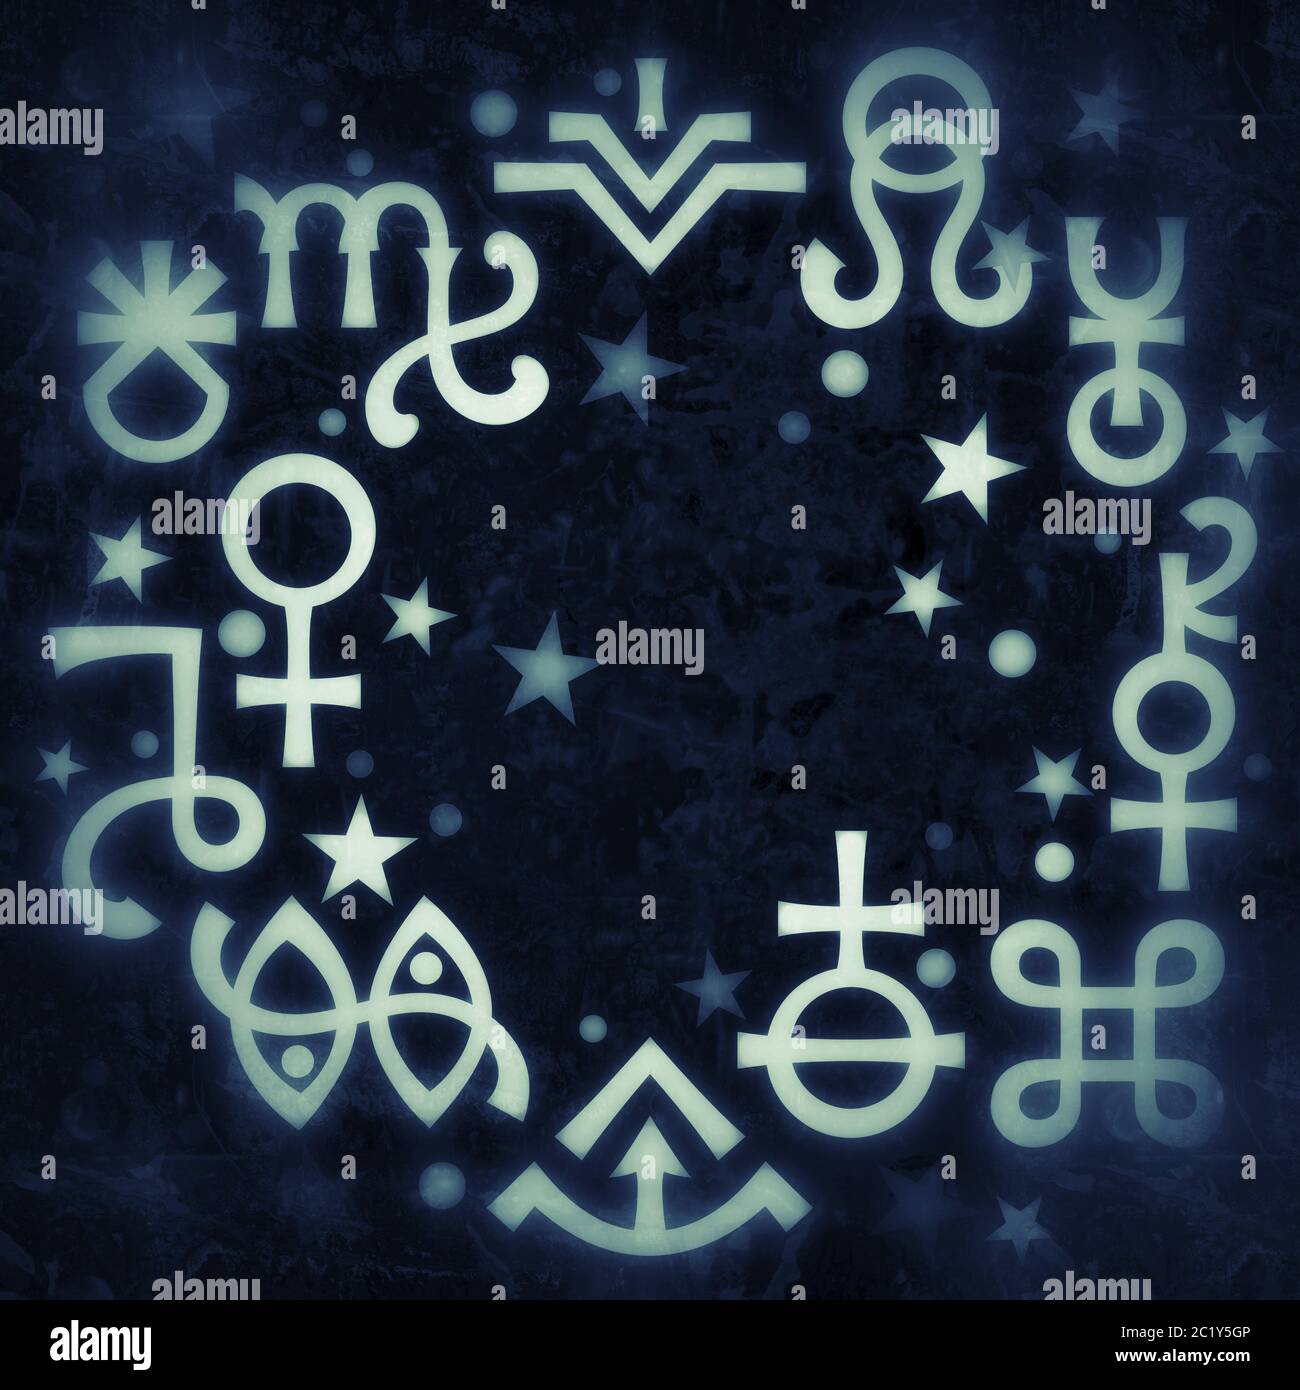 «Astrological diadem», the excerpt of some recent astrological signs and occult mystical symbols. Stock Photo